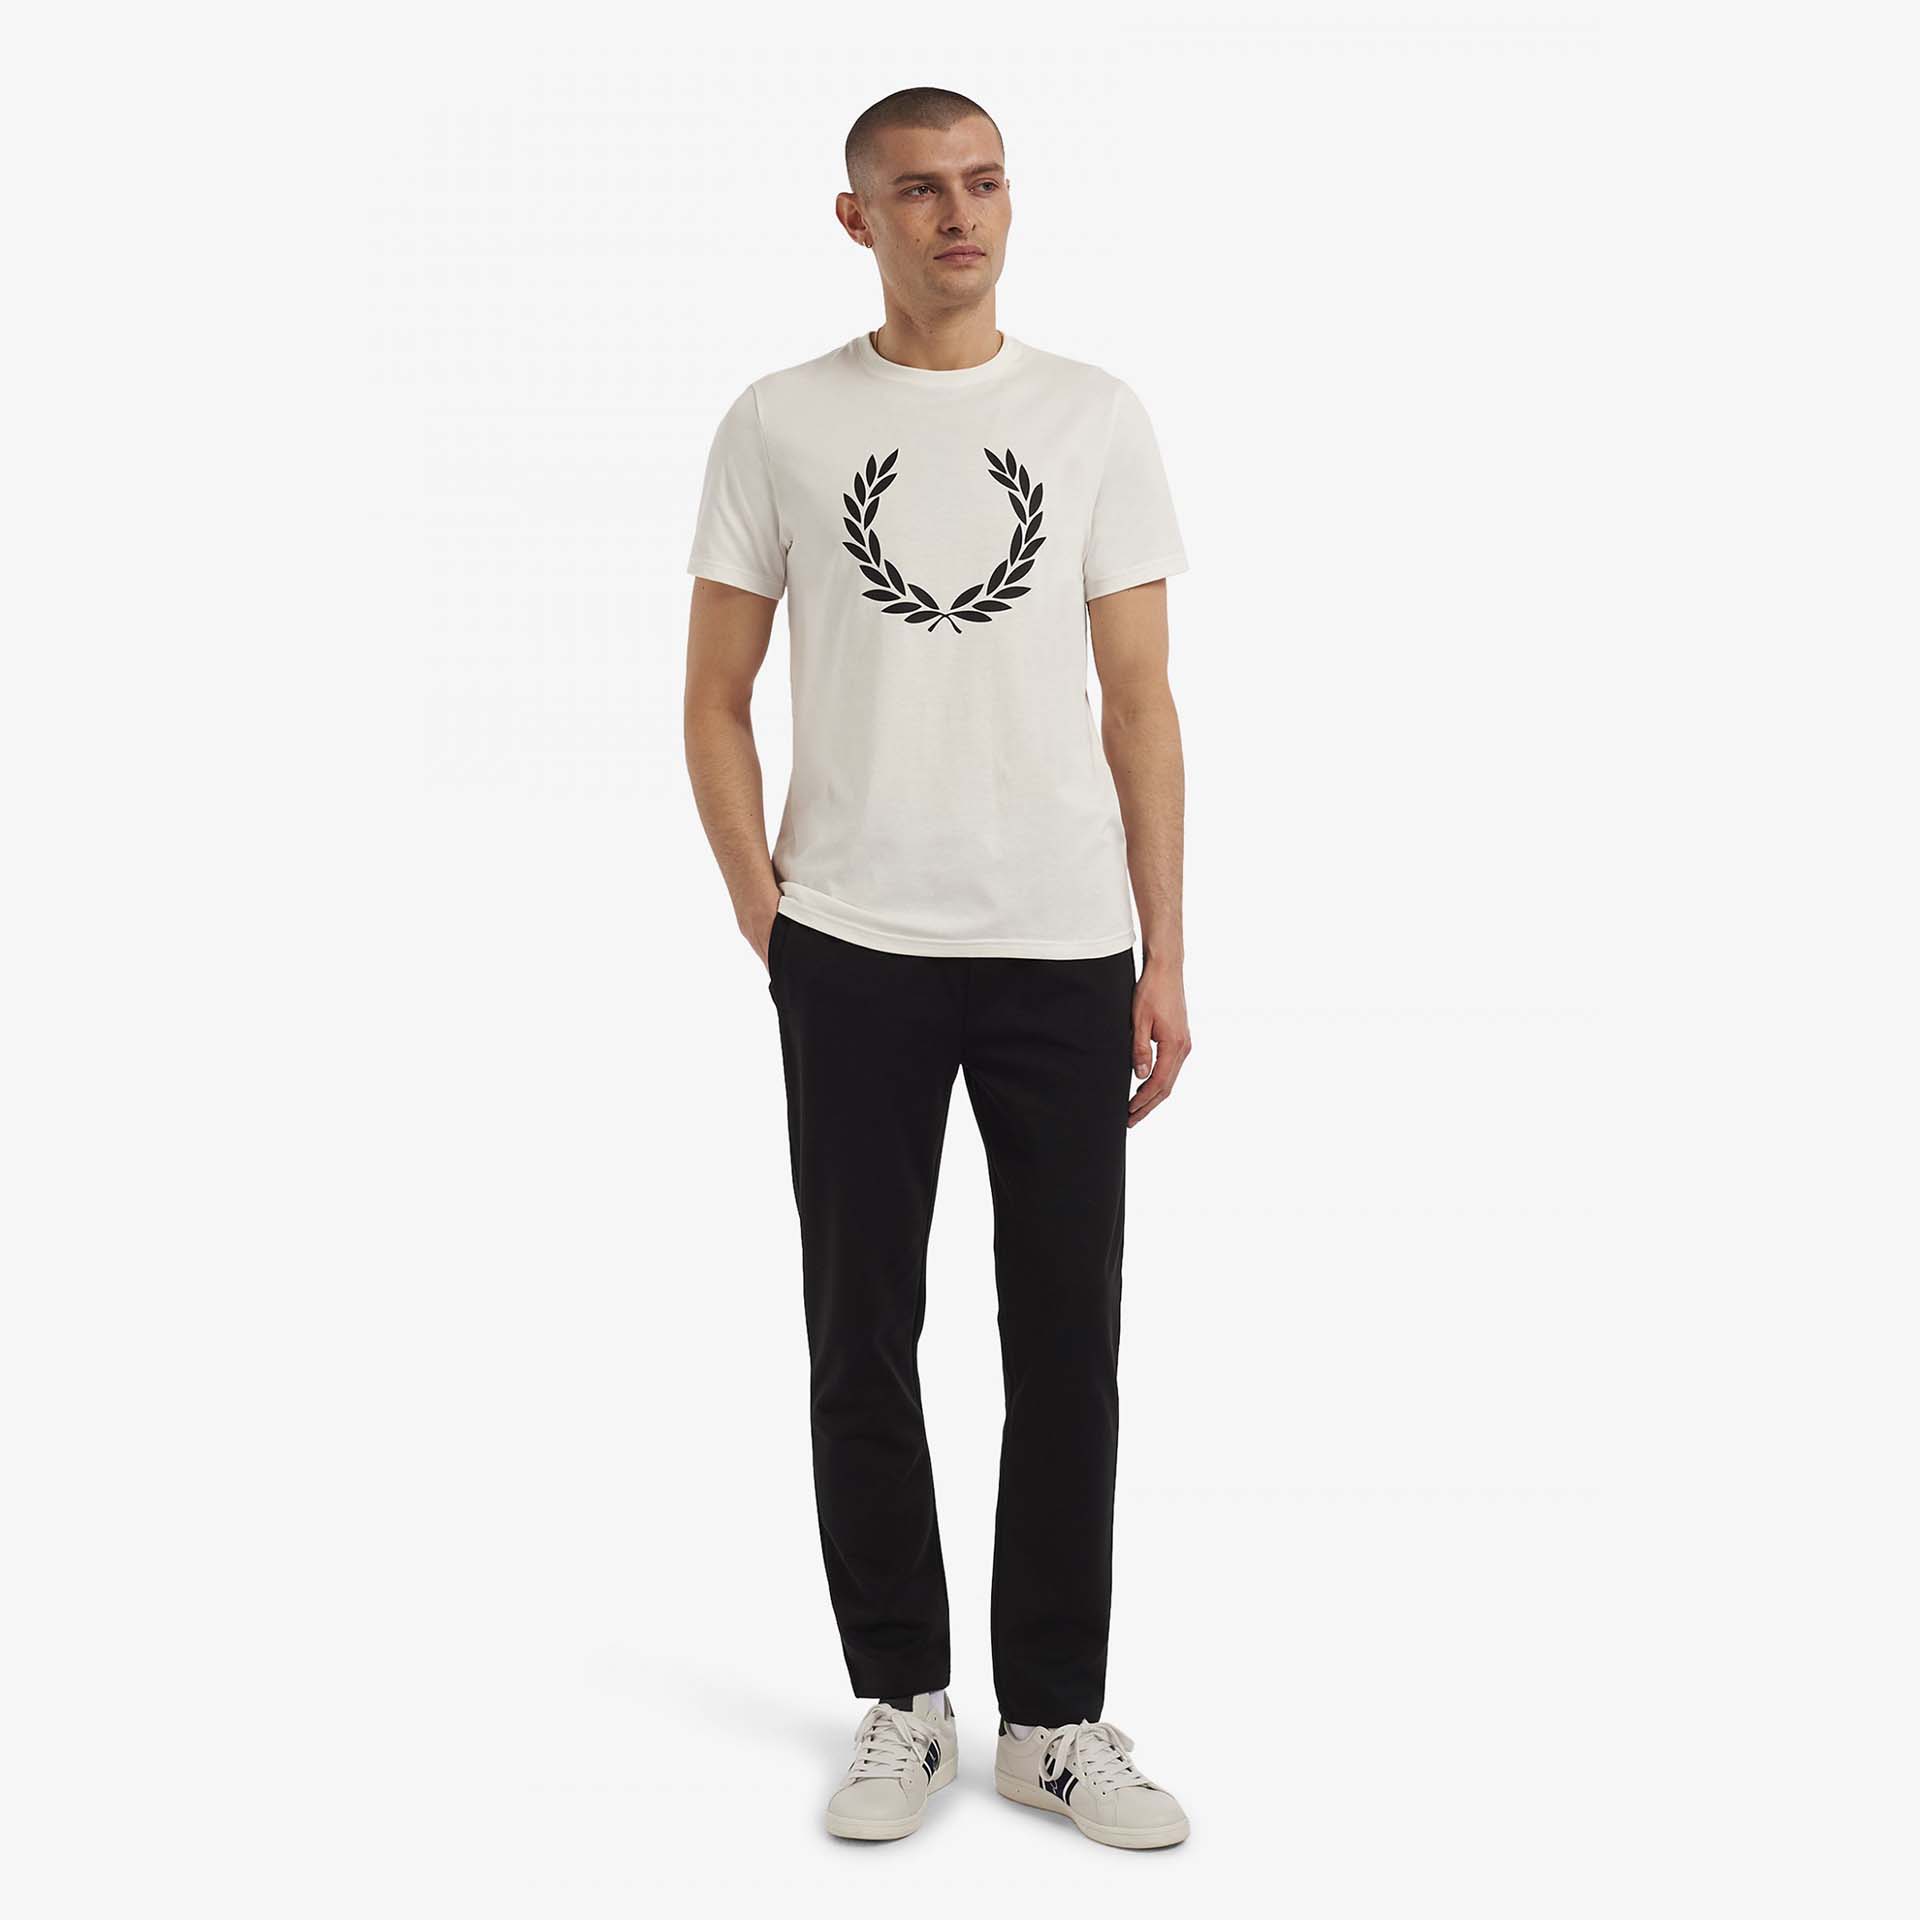 Fred Perry Reverse Tricot Track Pant Black